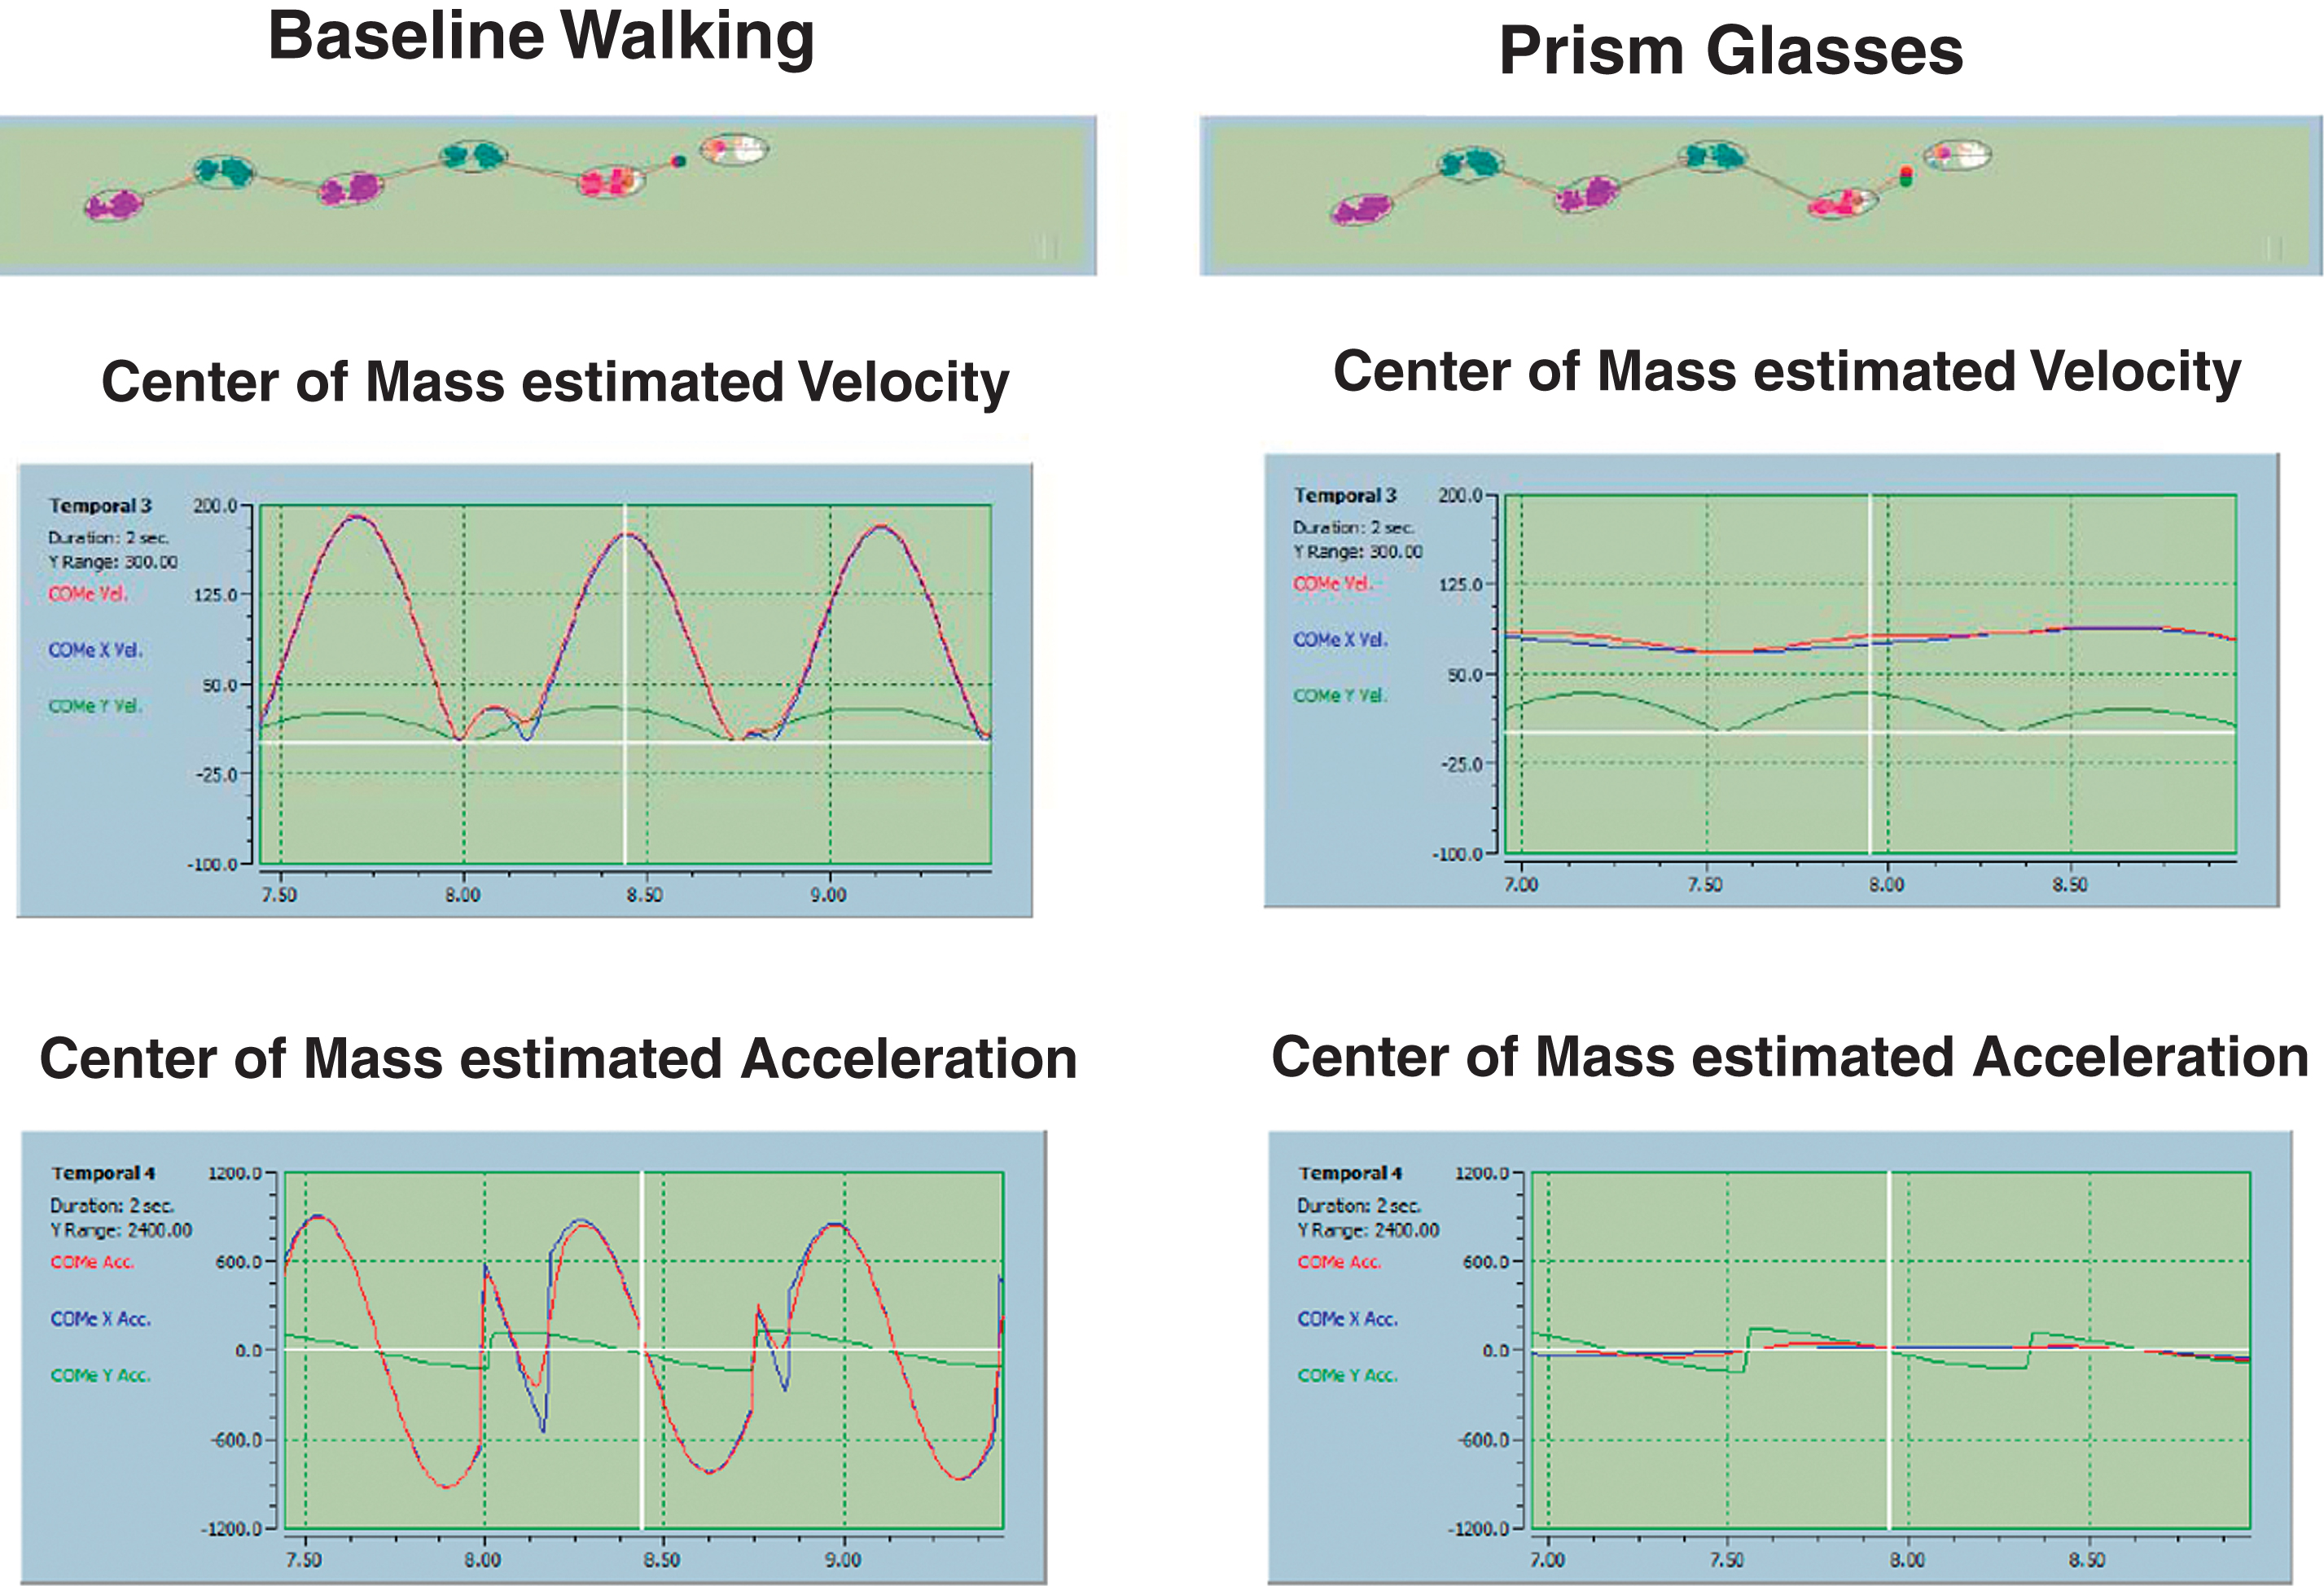 This figure demonstrates that the variability of the center of Mass (COM) estimated velocity and acceleration reduced significantly by introducing the yoked prism lenses.